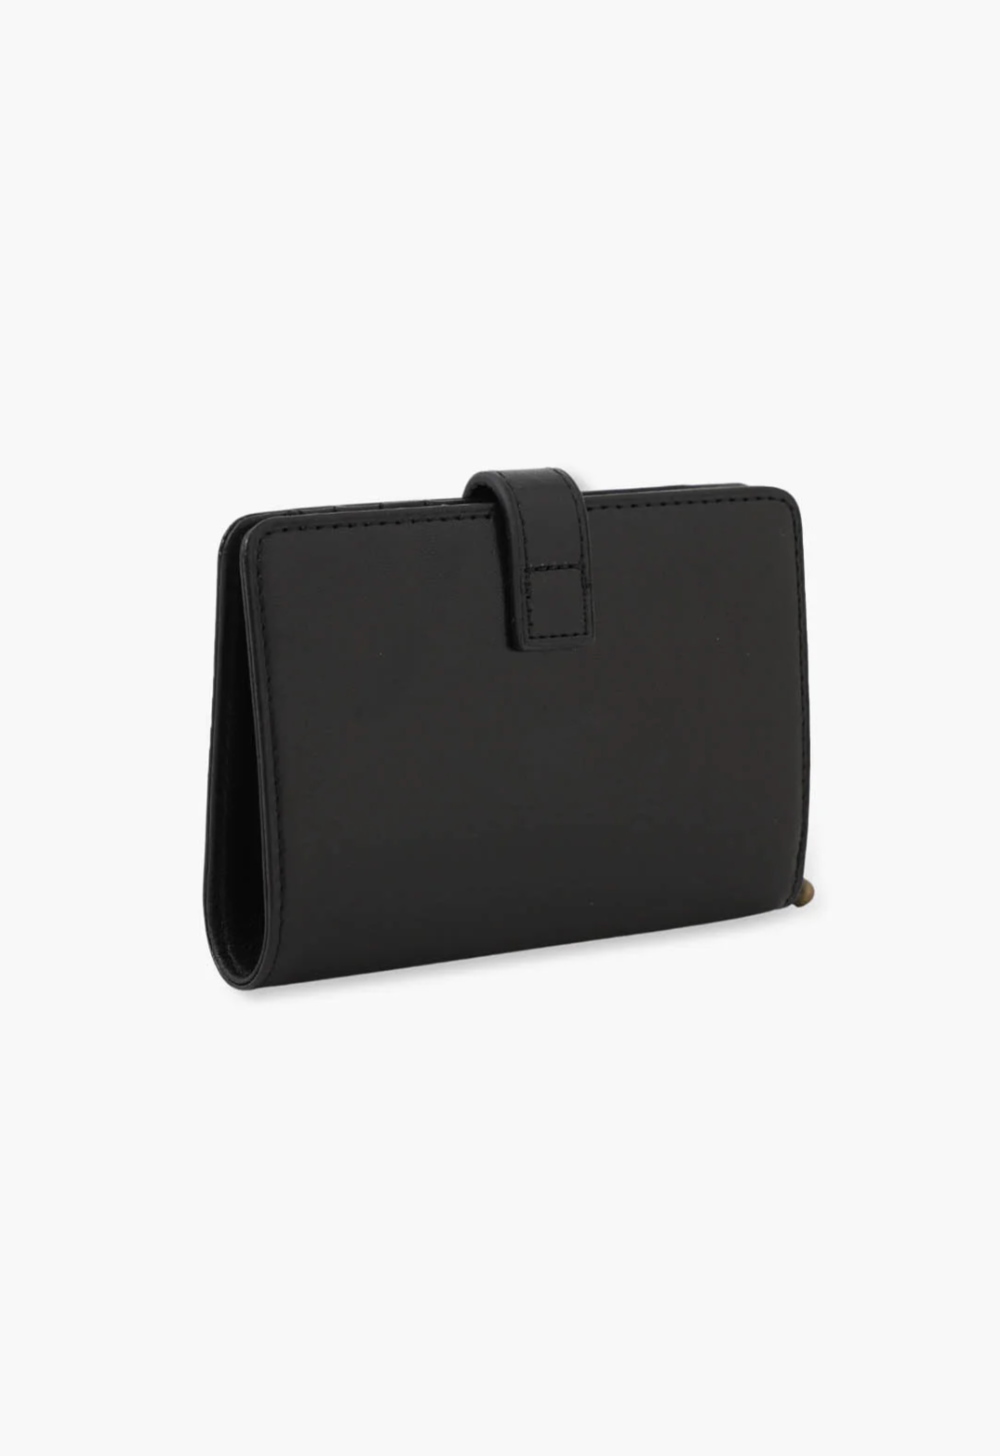 Small Roger Wallet black in a rectangular shape, flap across the top to close it